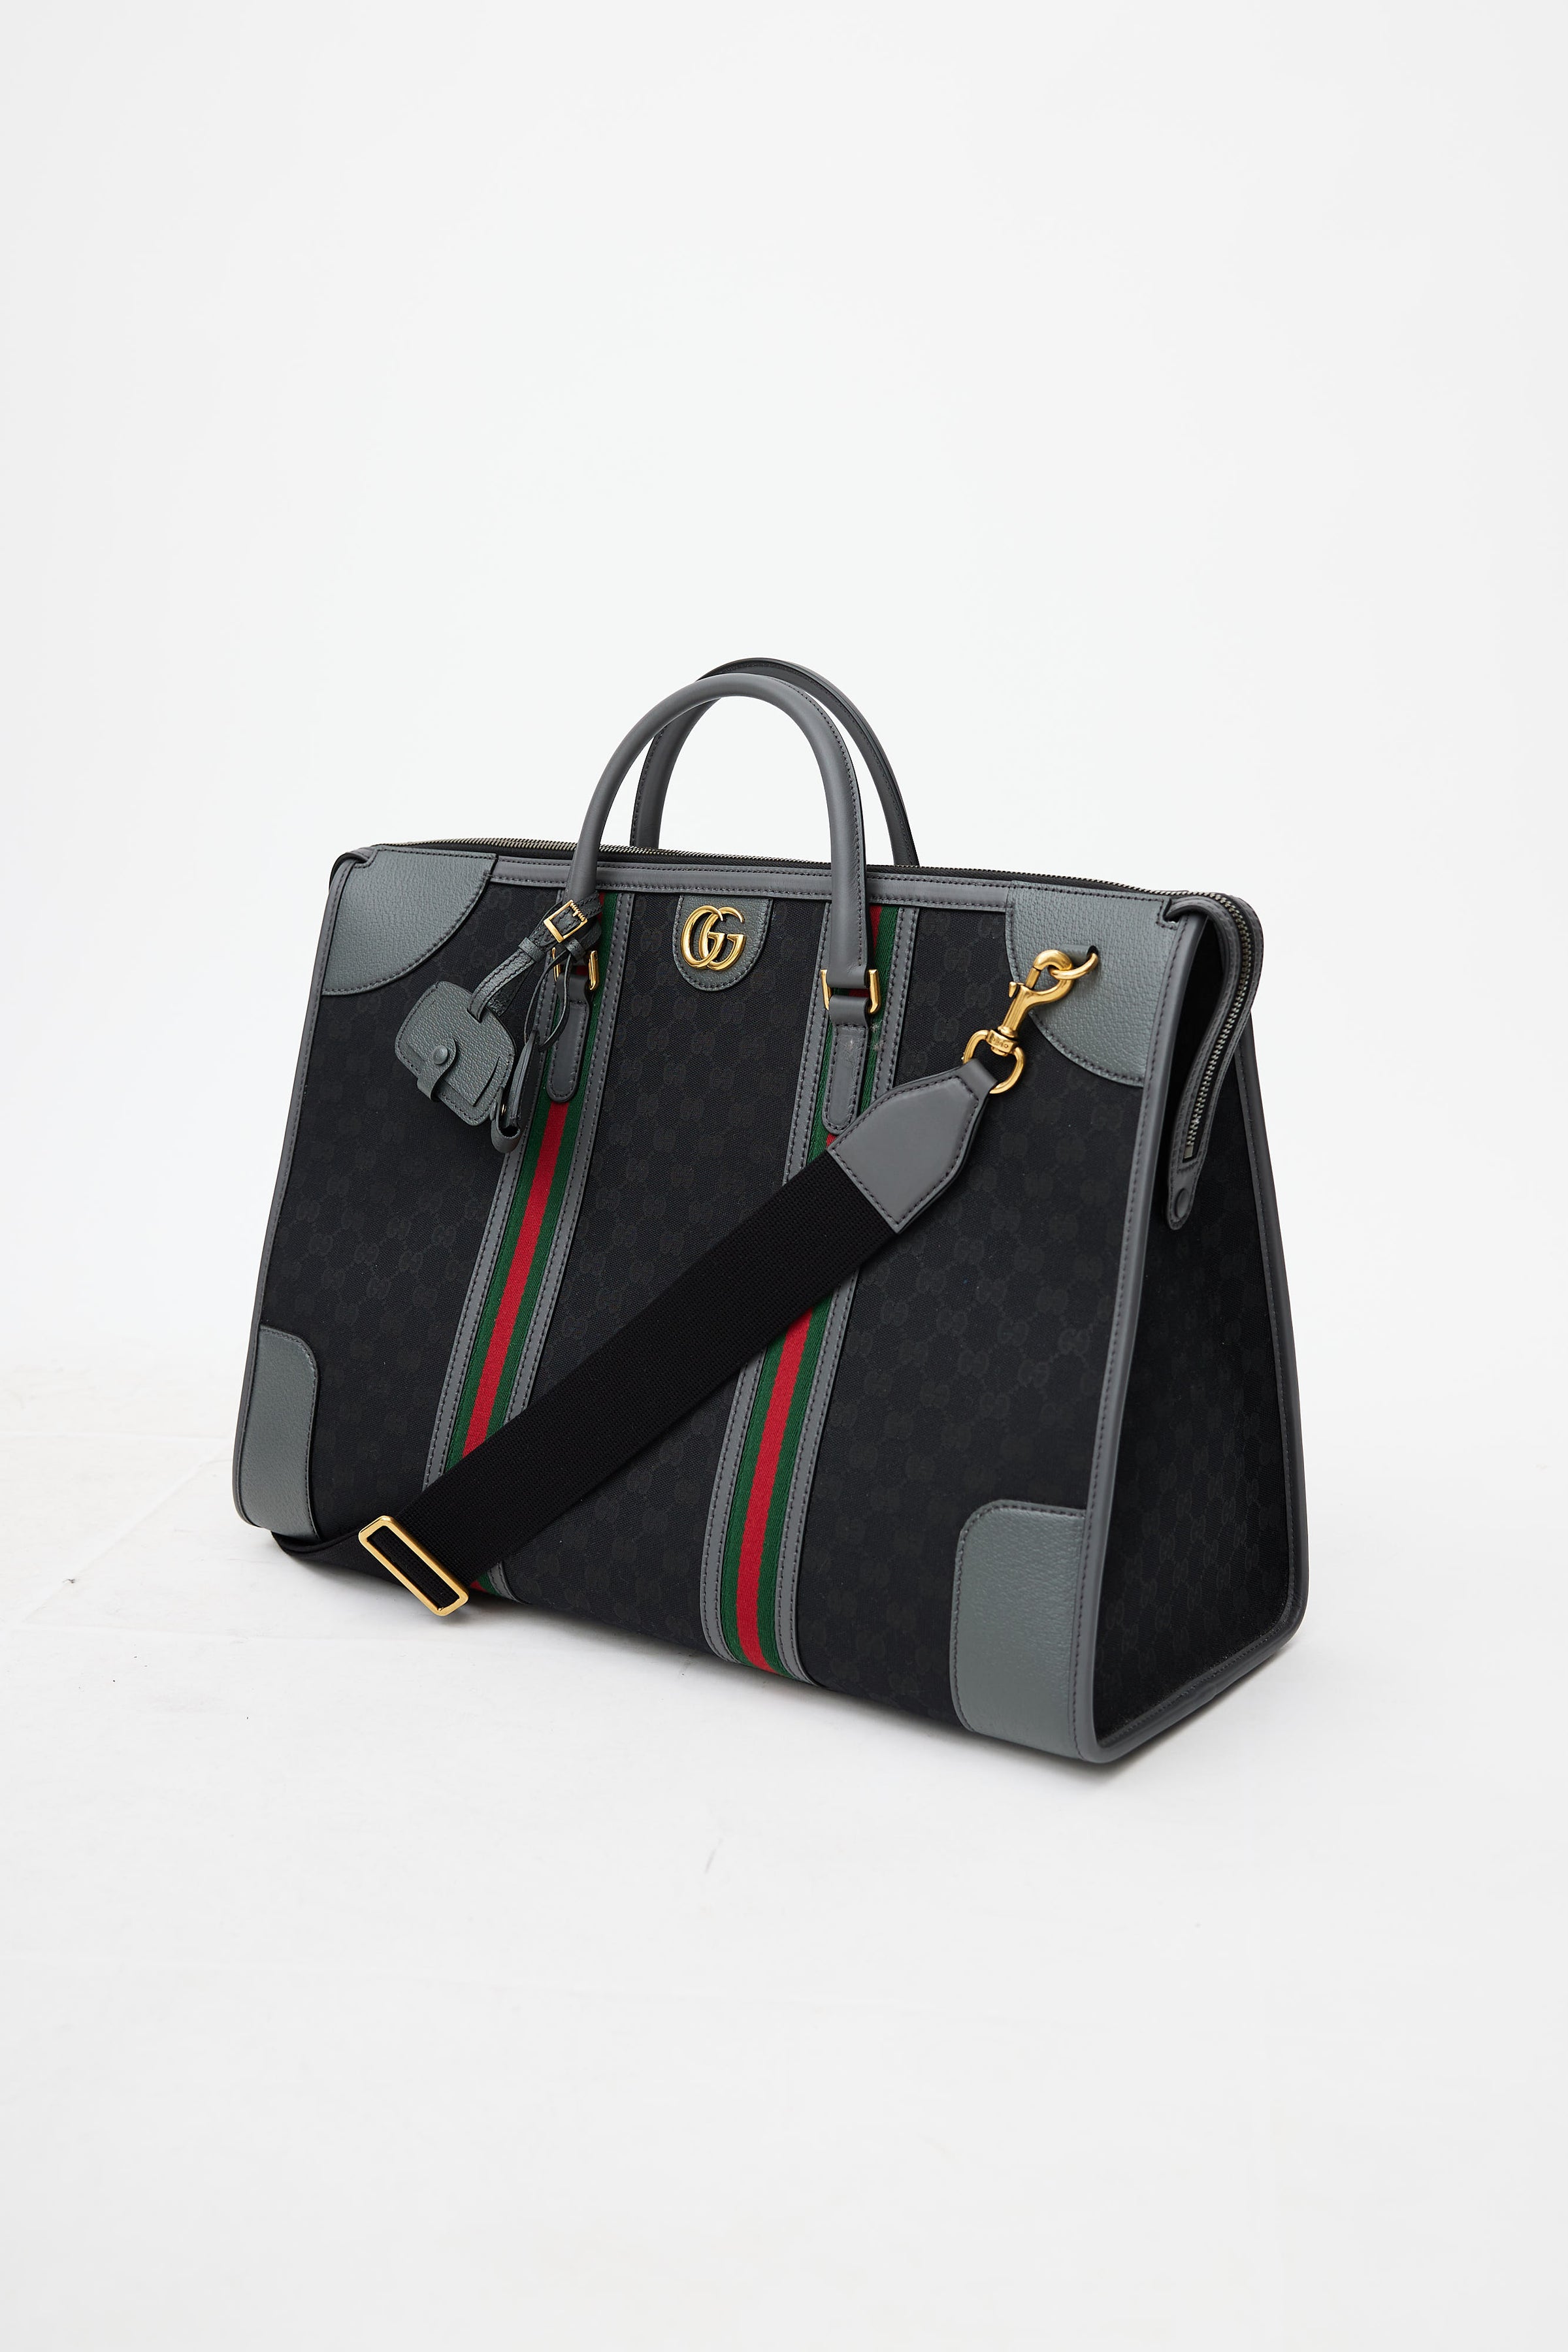 Gucci 500 Collection Duffel Bag | Gucci travel bag, Bags, Travel bags for  women